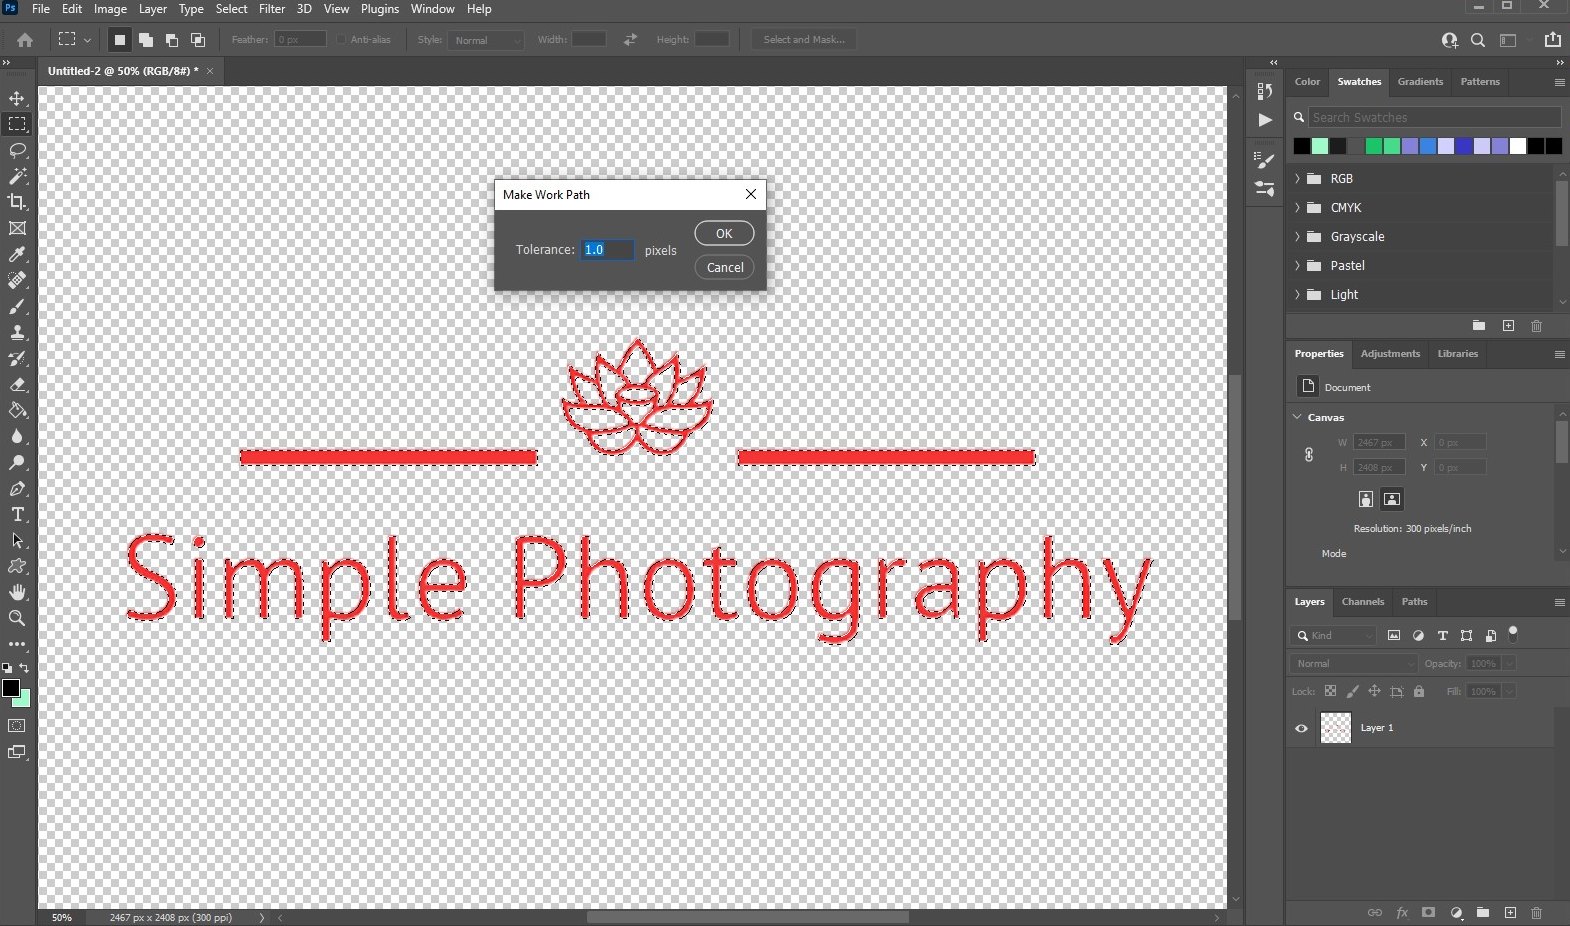 vectorize image in photoshop - 3